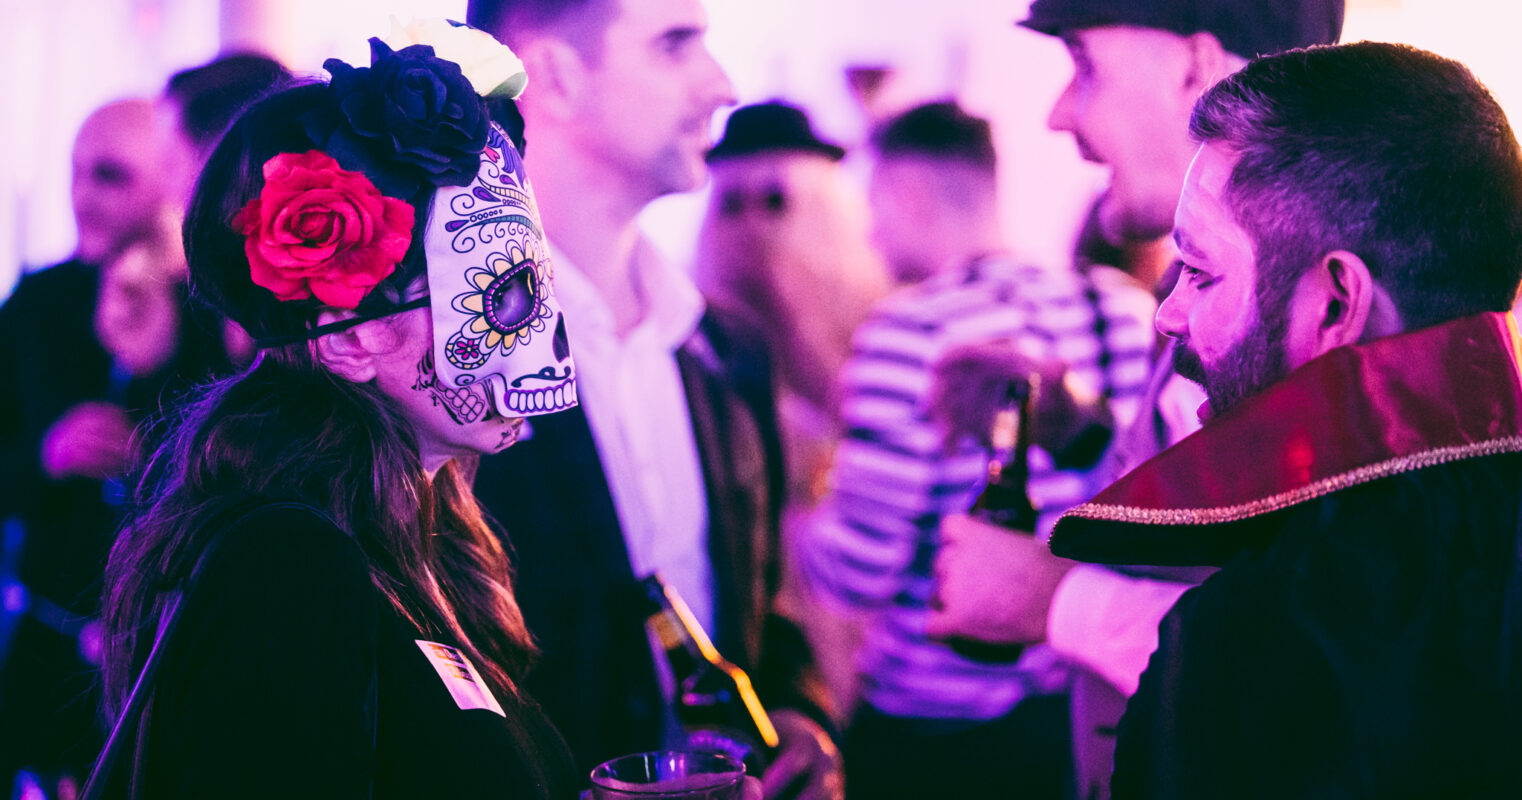 A close-up of a guest in a detailed skull mask, engaging in conversation at a festive event.